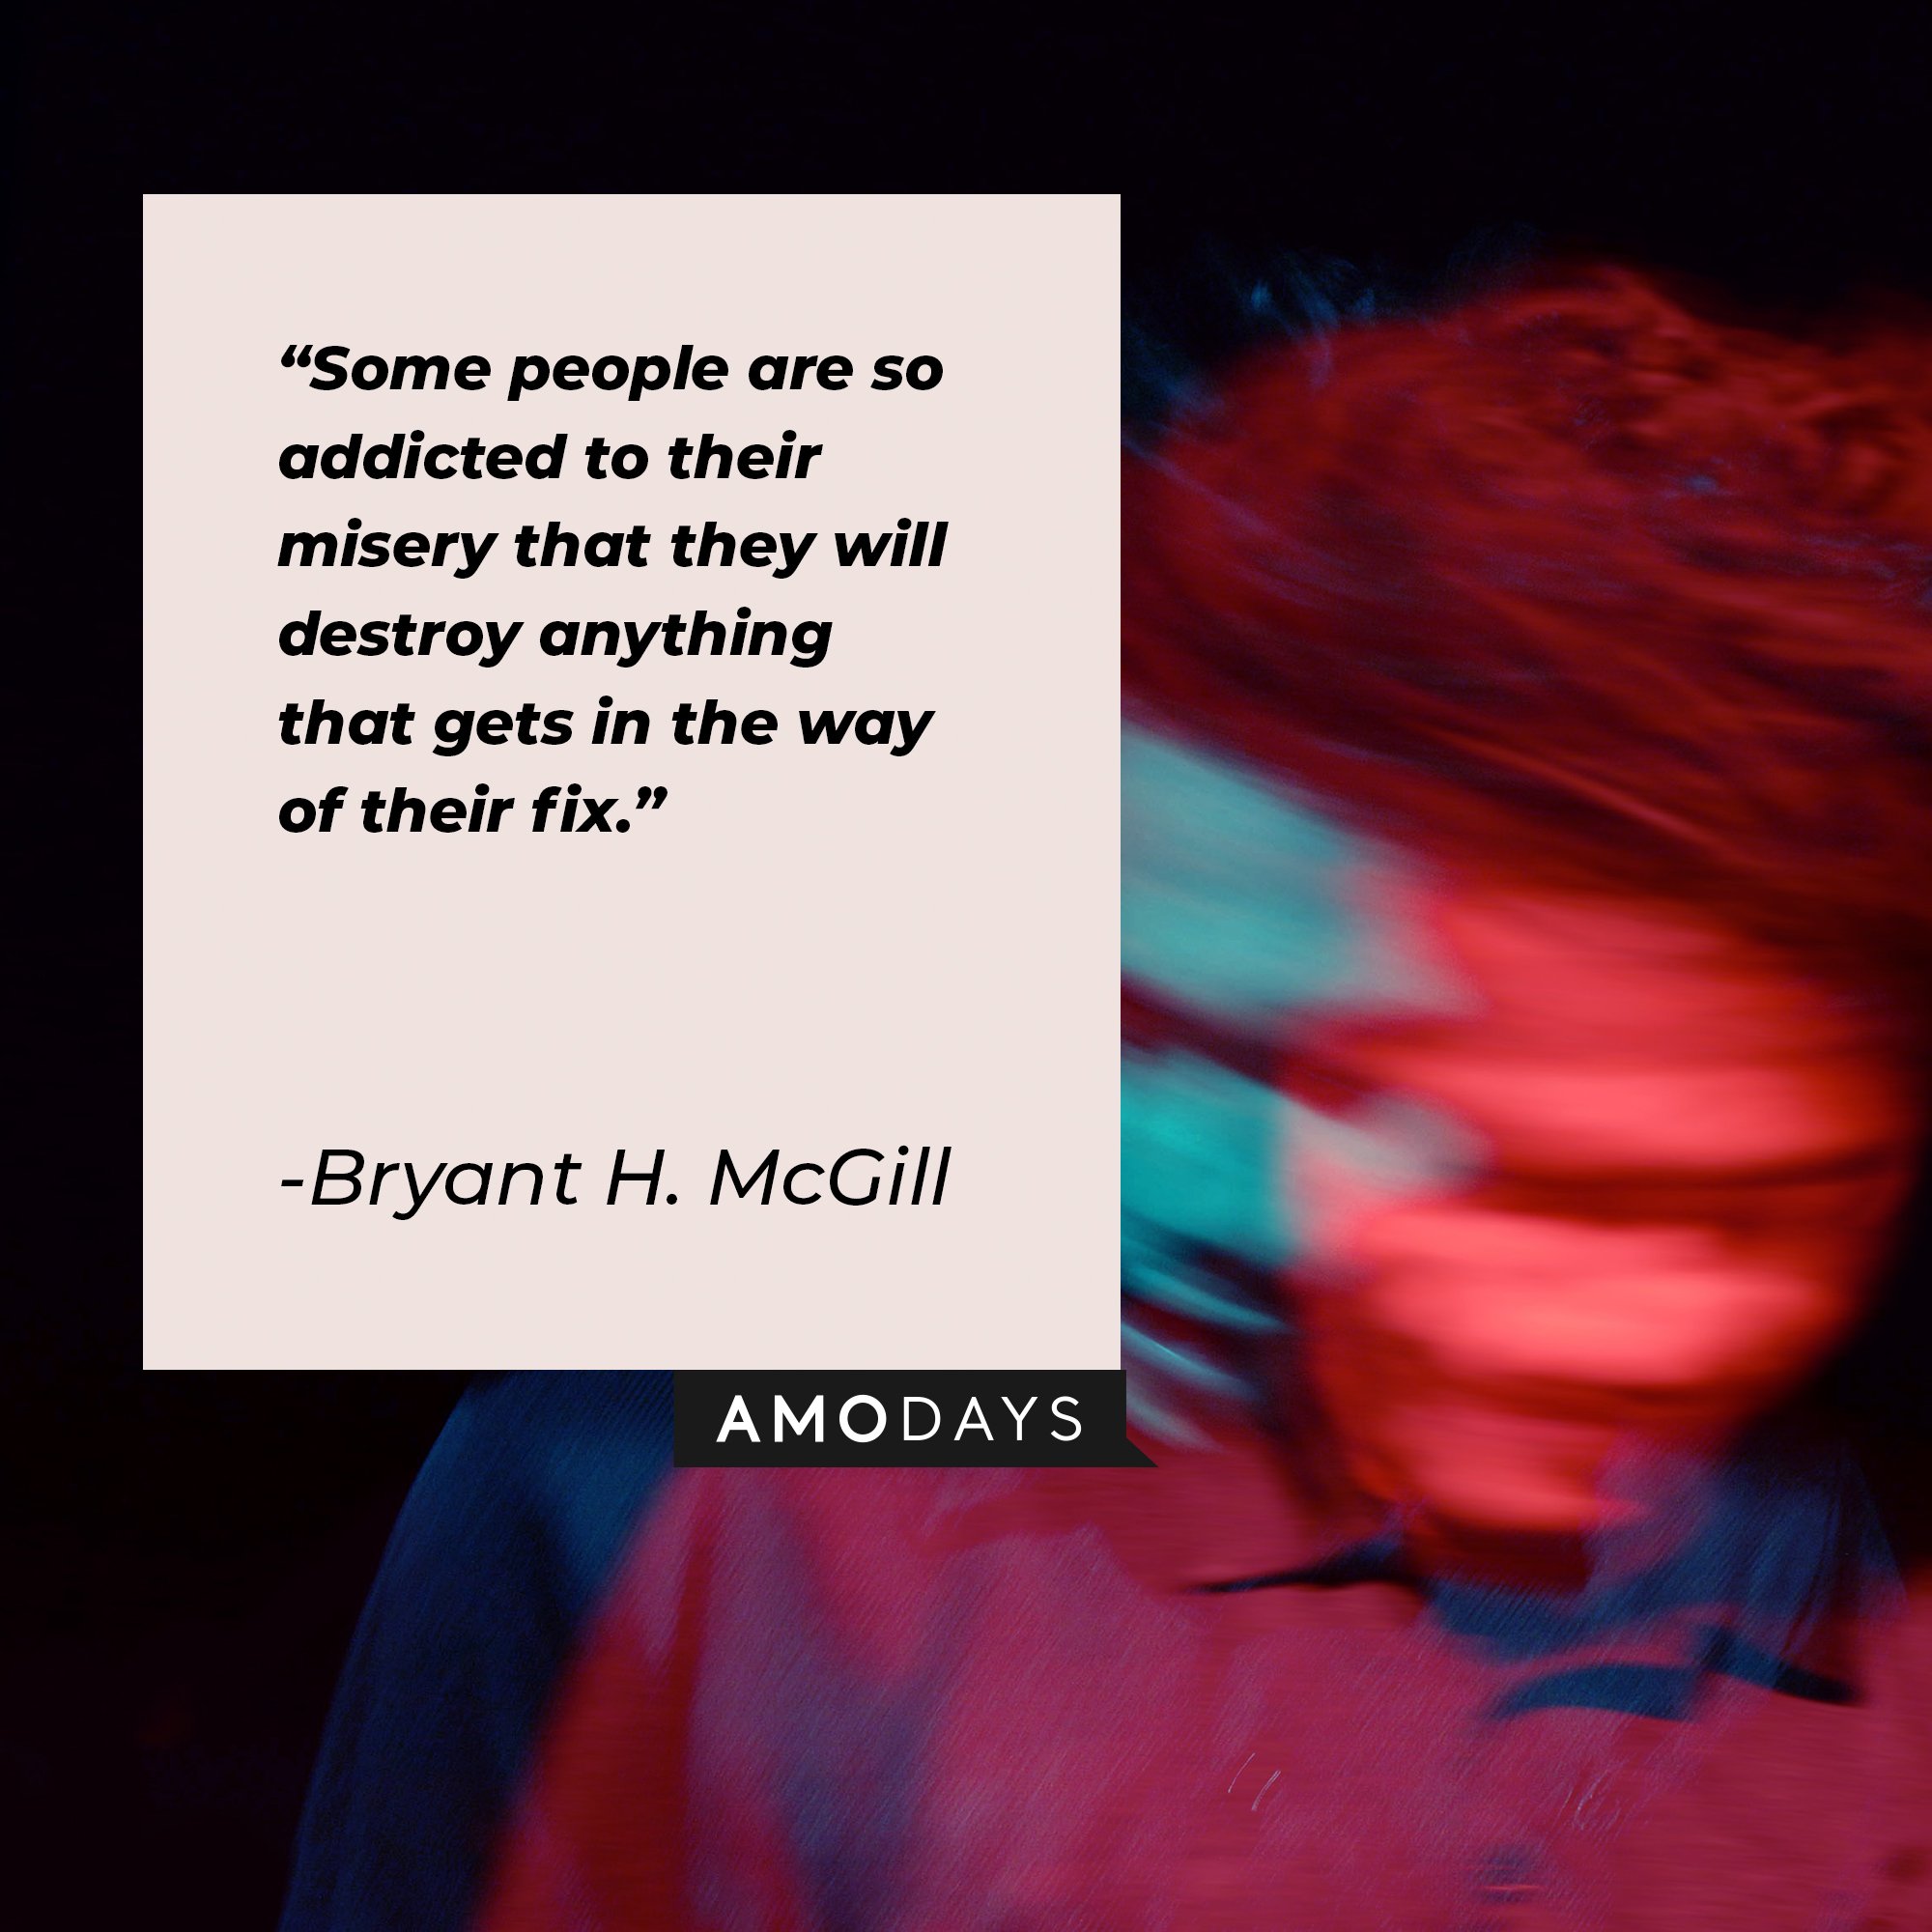  Bryant H. McGill’s quote: "Some people are so addicted to their misery that they will destroy anything that gets in the way of their fix." | Image: AmoDays